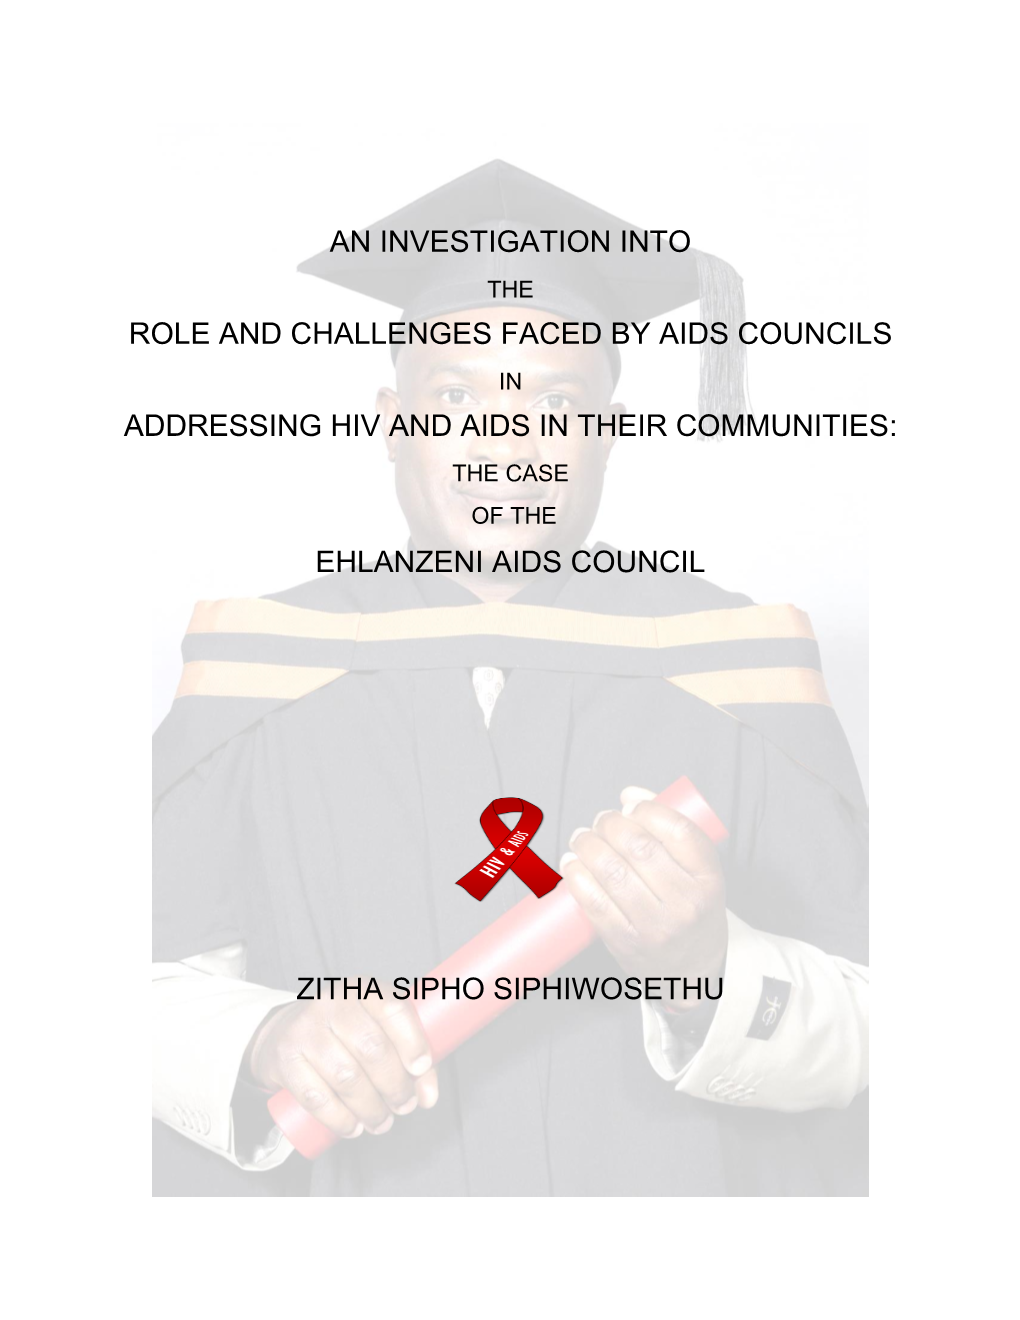 Role and Challenges Faced by Aids Councils in Addressing Hiv and Aids in Their Communities: the Case of the Ehlanzeni Aids Council